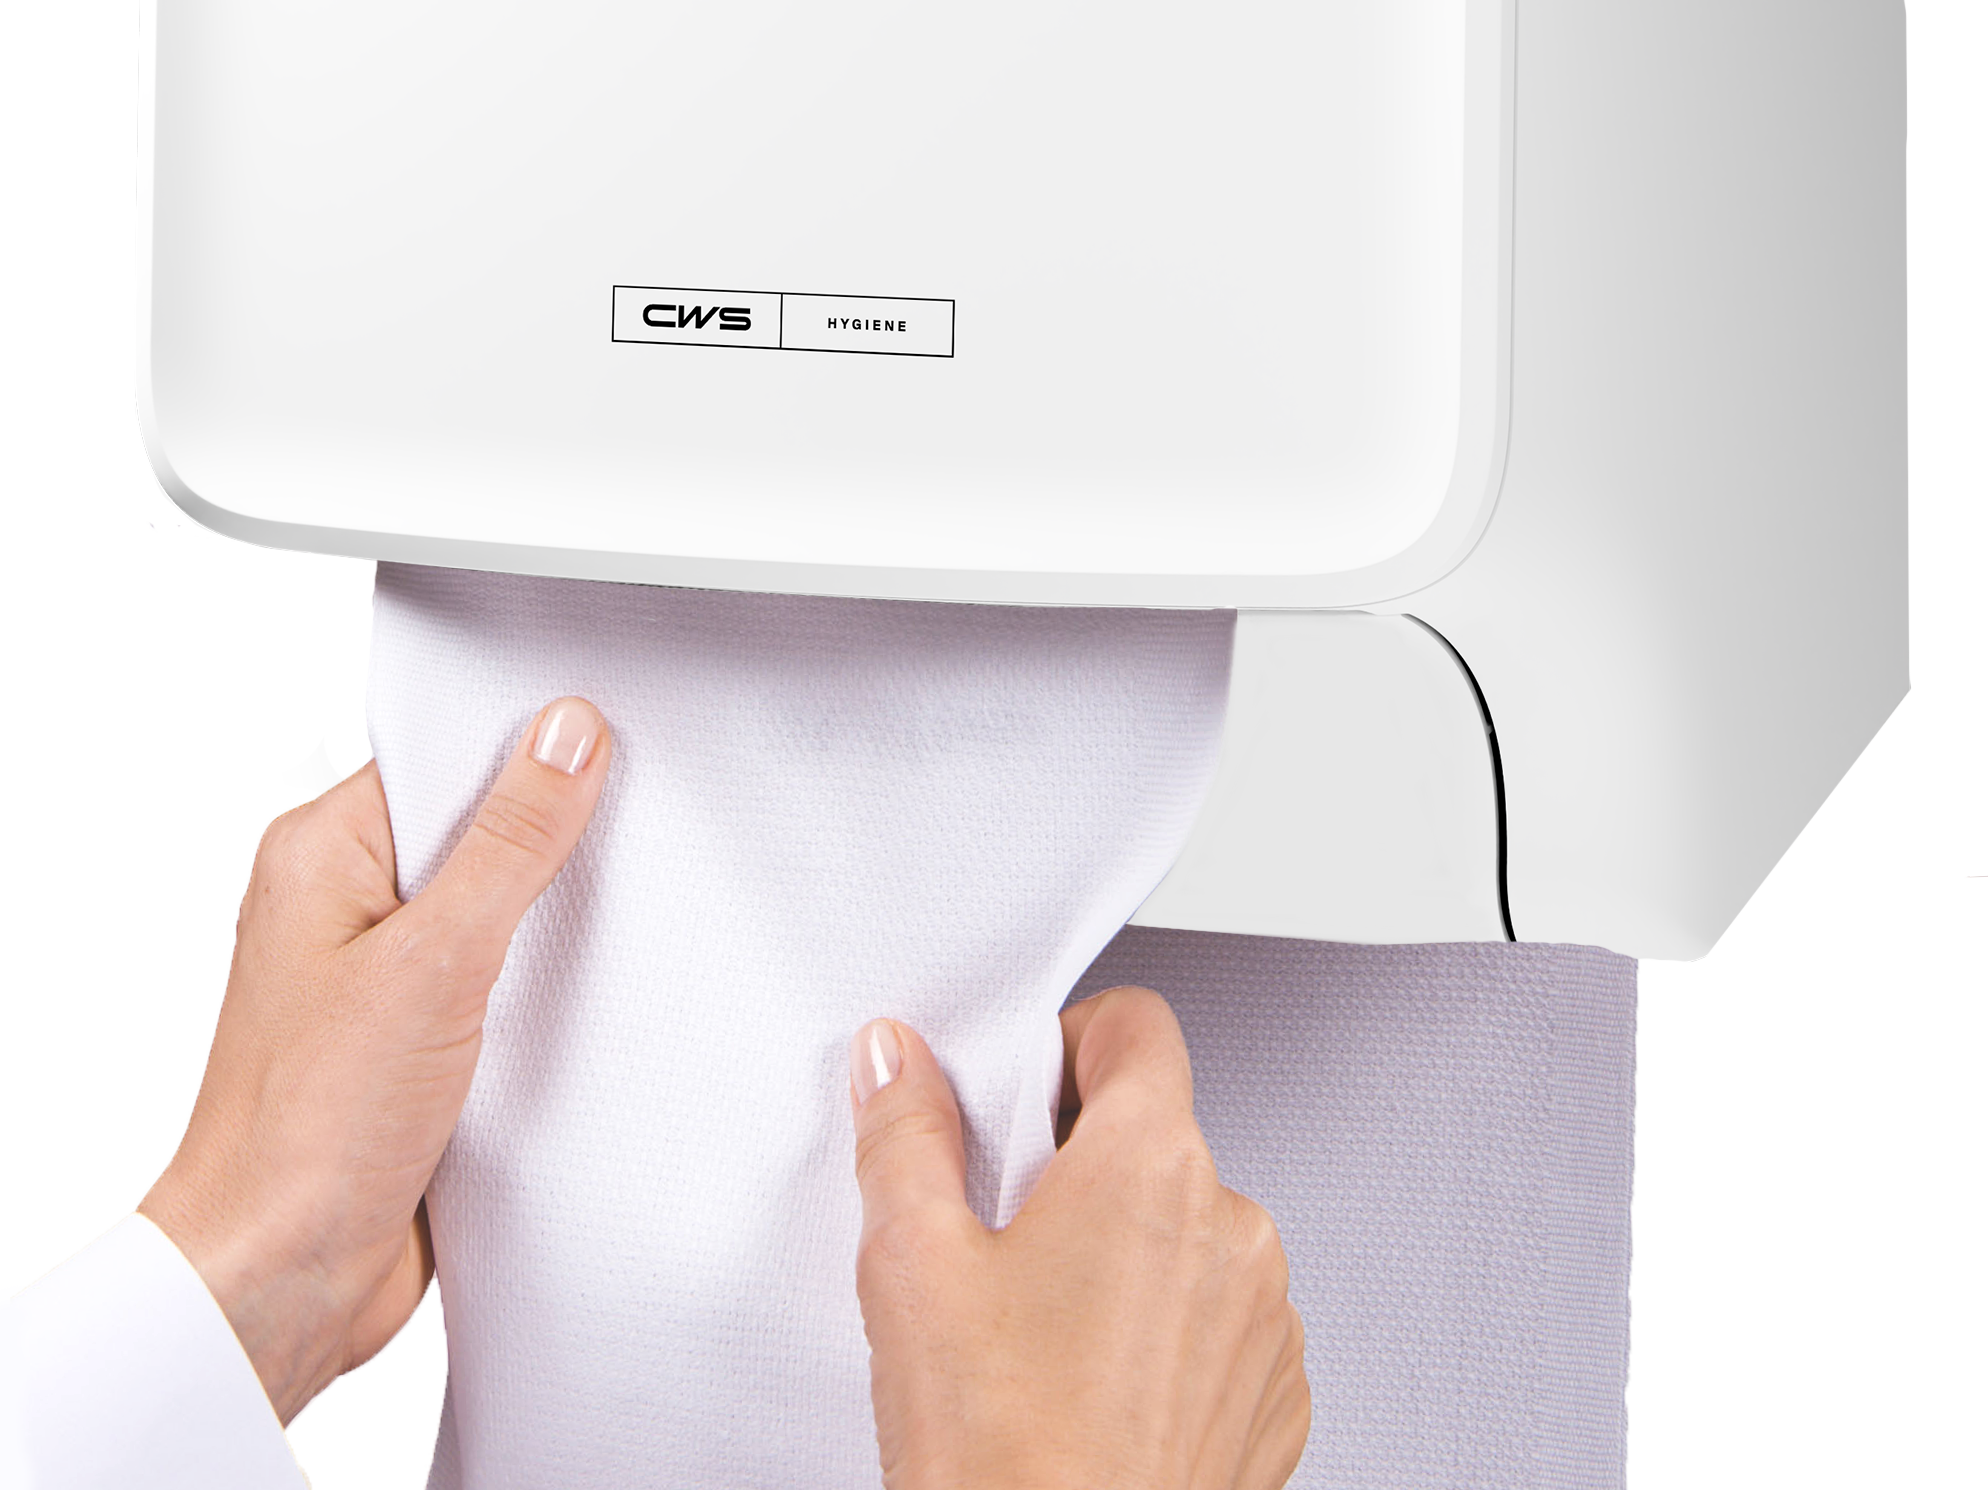 What should you use, a hand dryer or a paper towel?